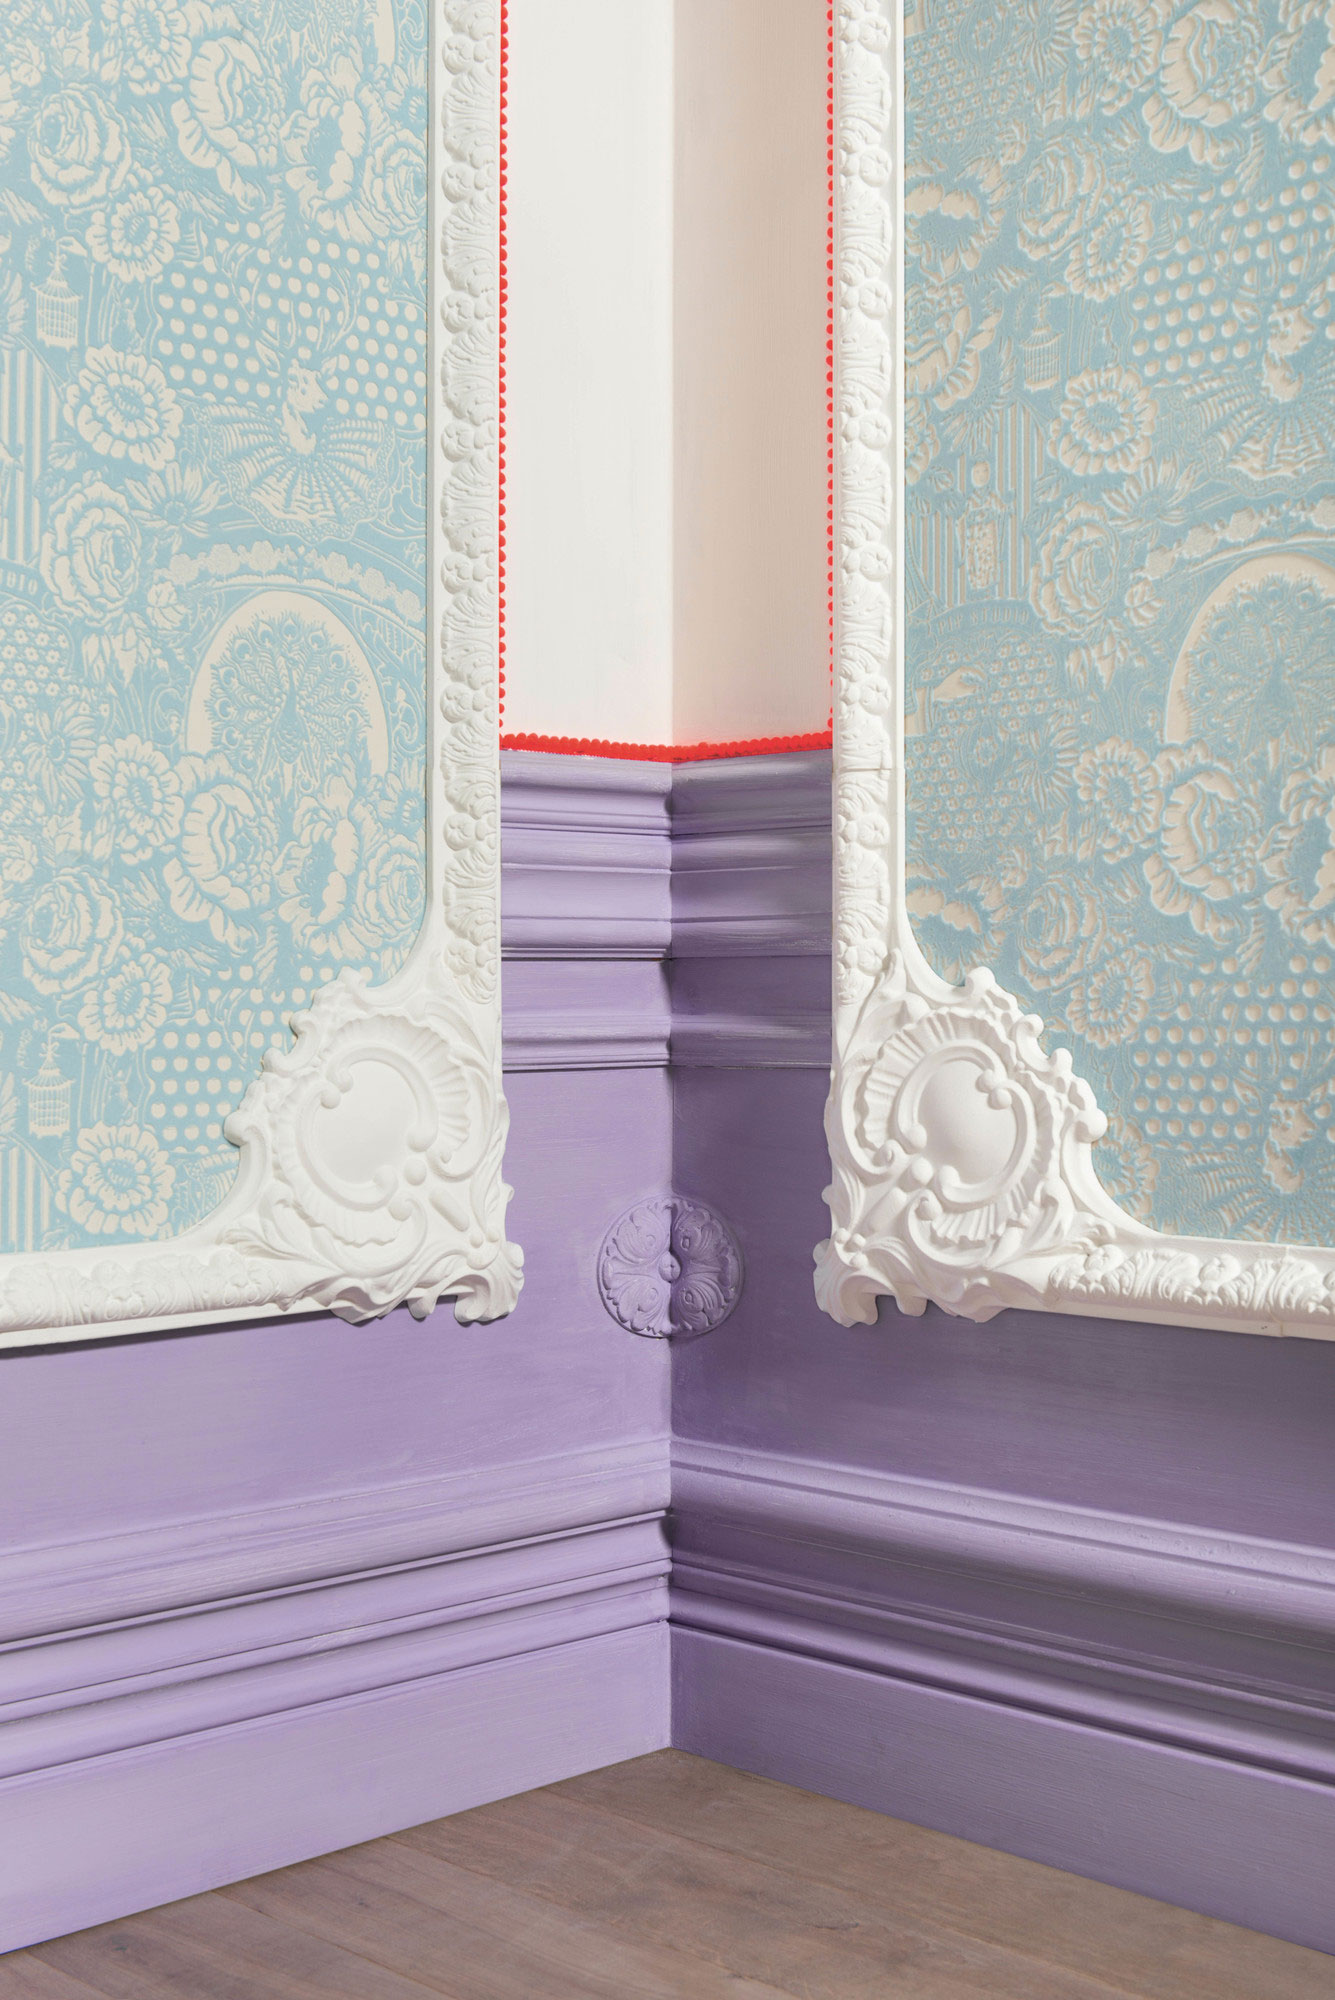 Panel Moulding - Click Image to Close